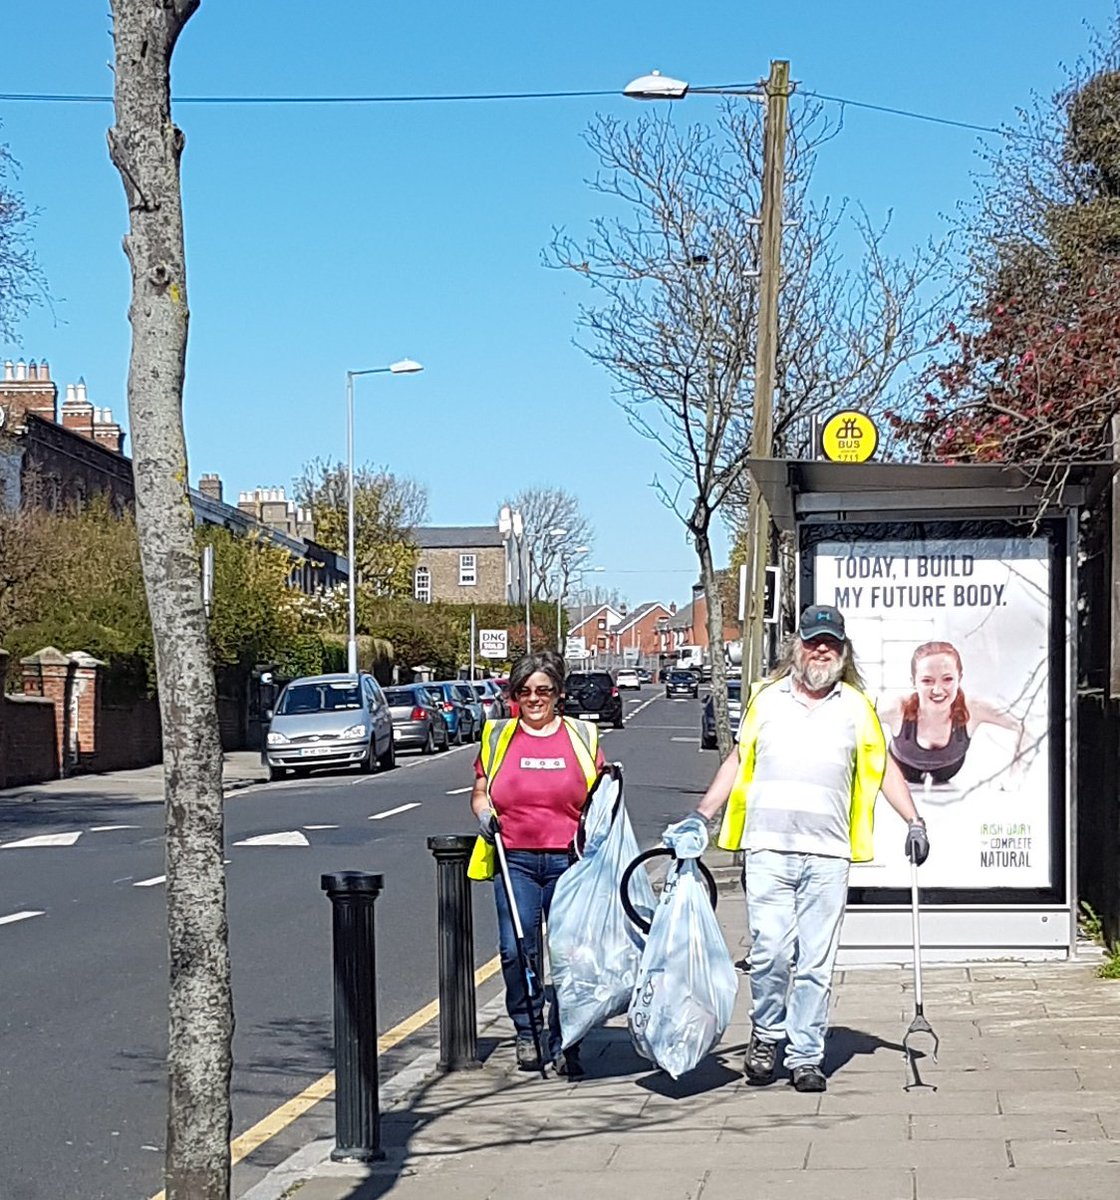 Some snaps of our volunteers on the #TeamDublincleanup  today
Stoneybatter is gleaming in the sunshine